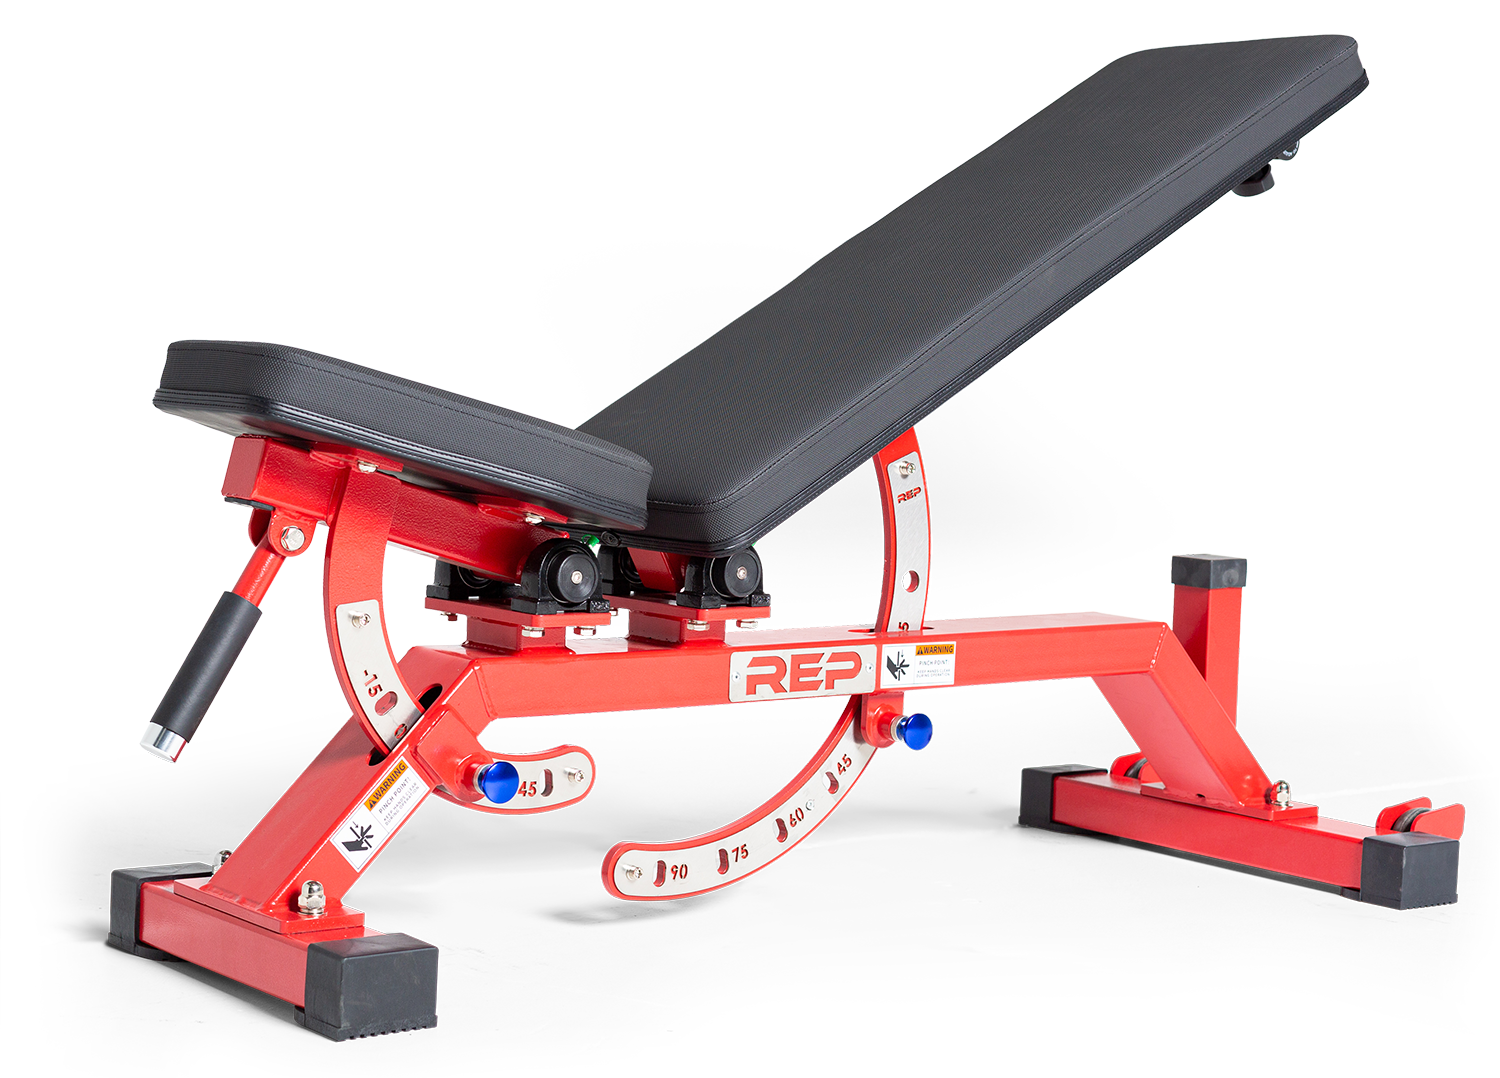 AB-5100 Adjustable Weight Bench - Red